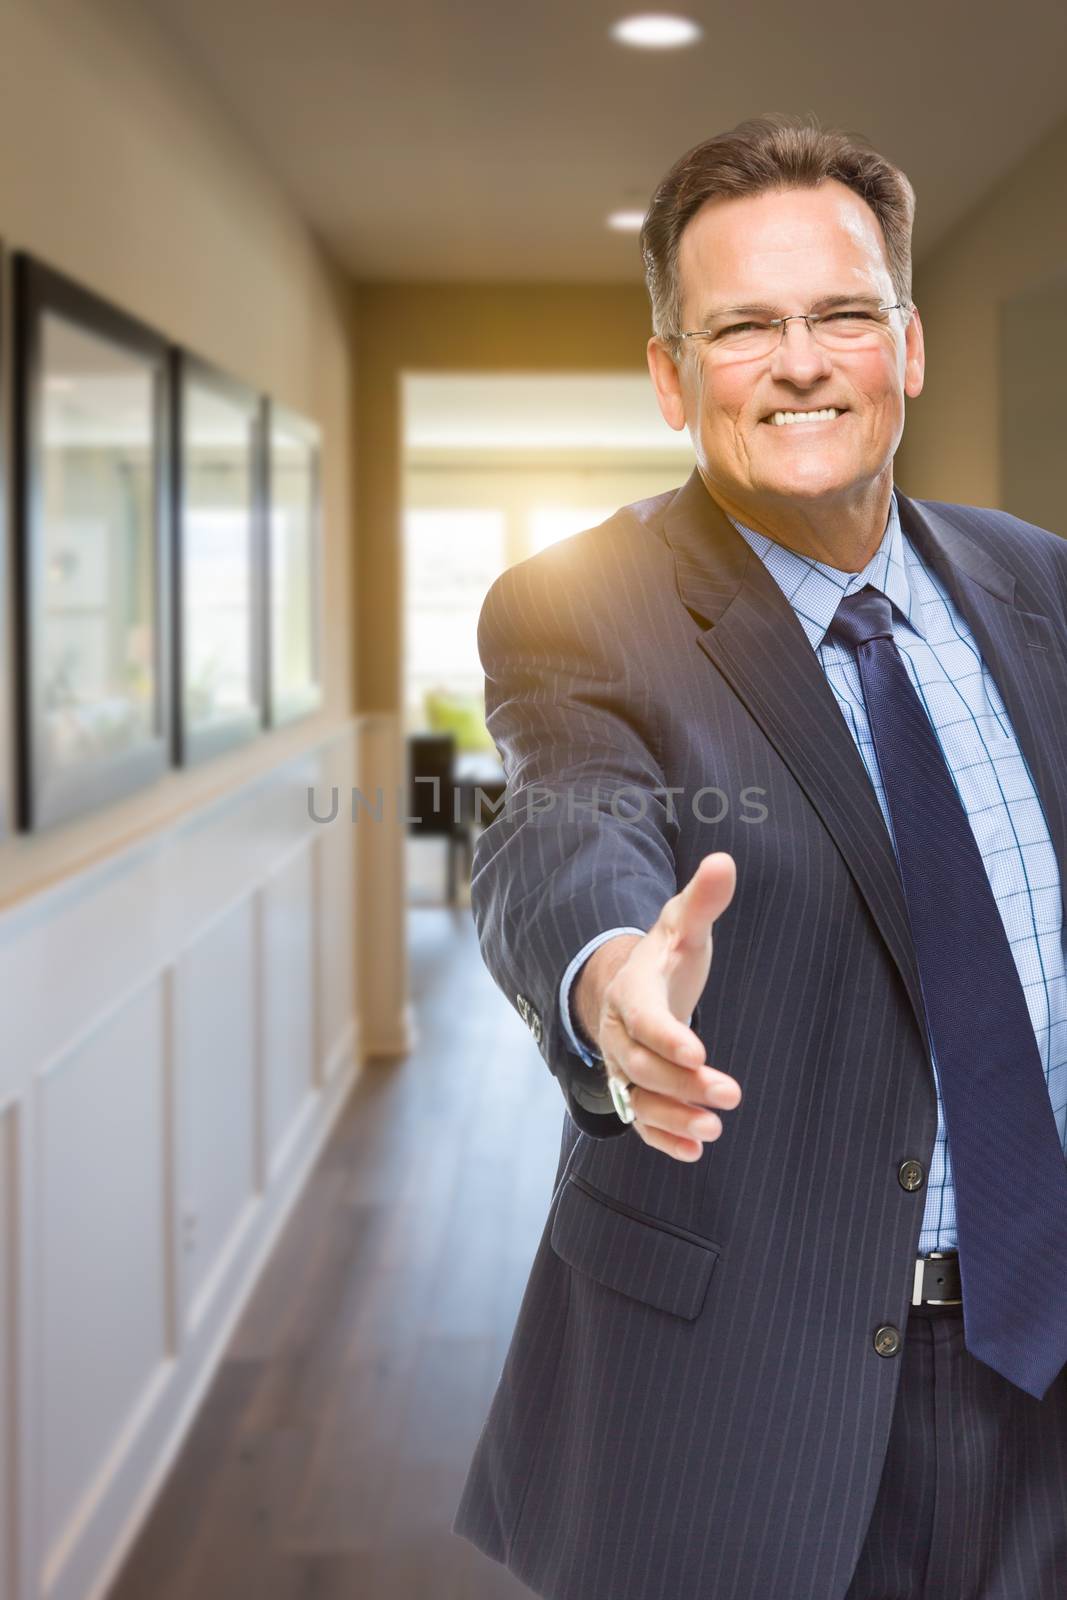 Smiling Male Agent Reaching for Hand Shake in Hallway of Beautiful New House.